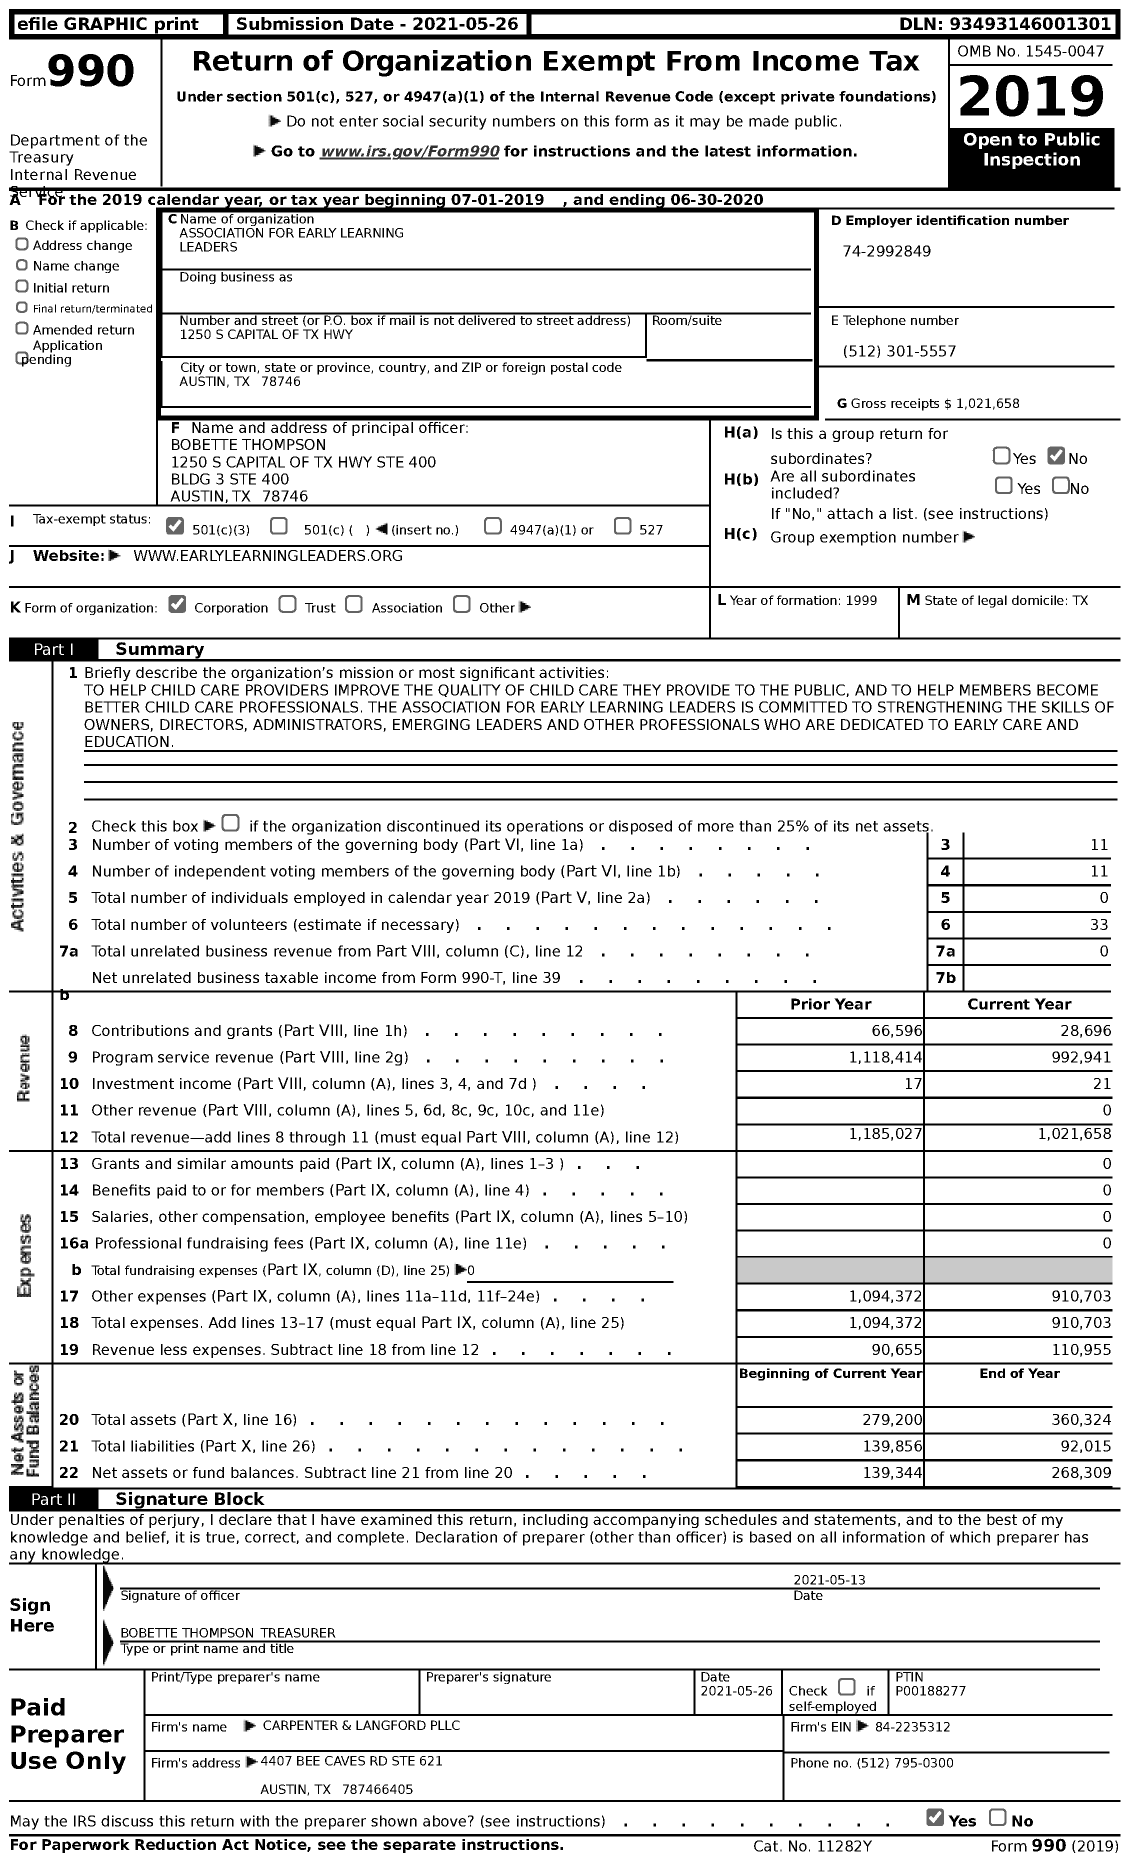 Image of first page of 2019 Form 990 for Association for Early Learning Leaders